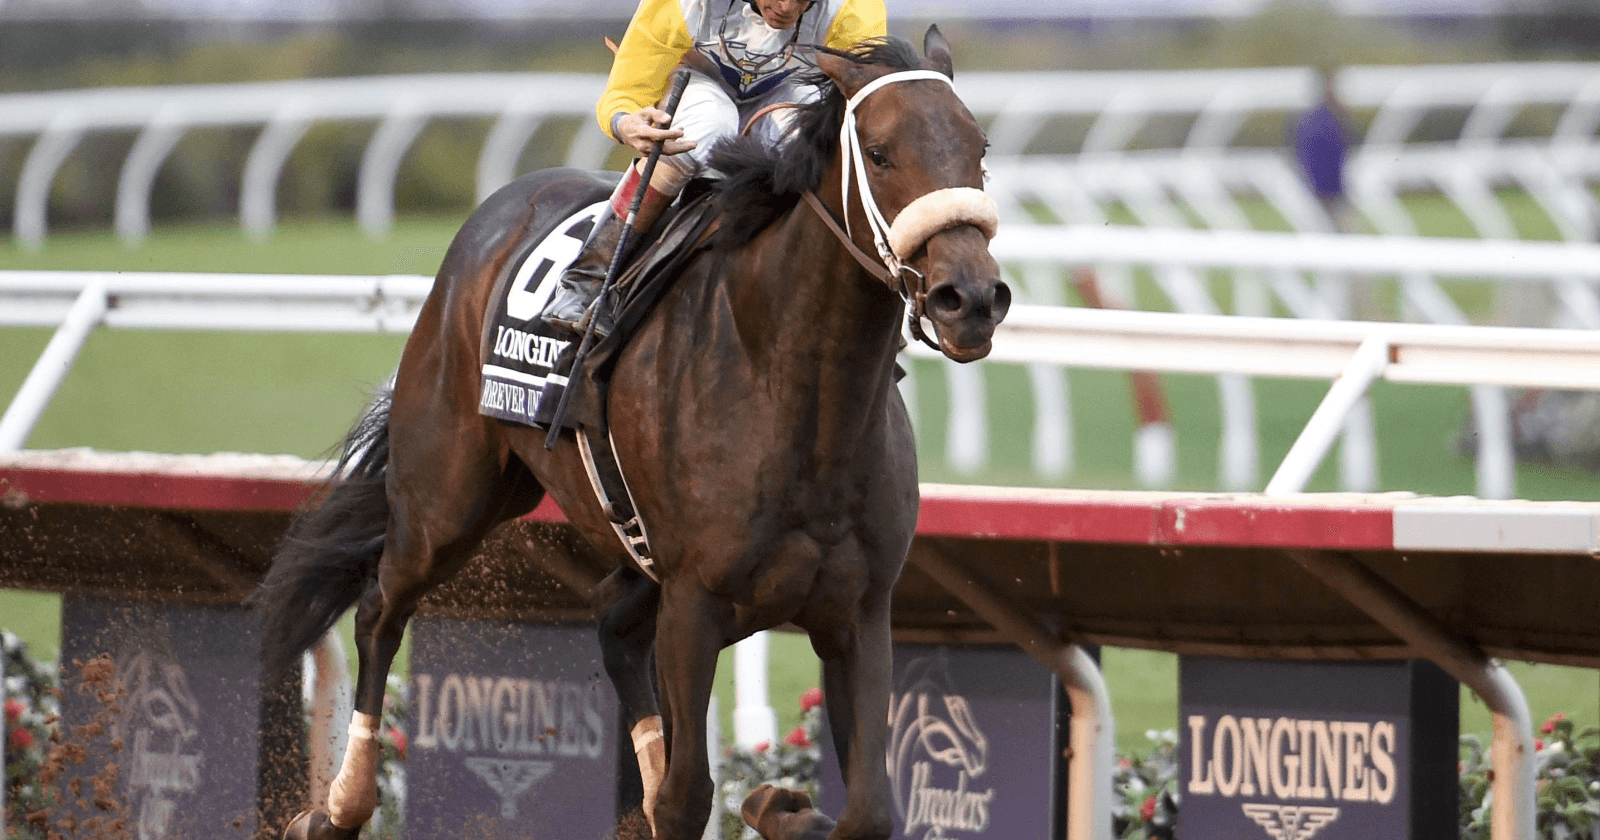 2018 Breeders’ Cup Distaff at Churchill Downs, picks and analysis